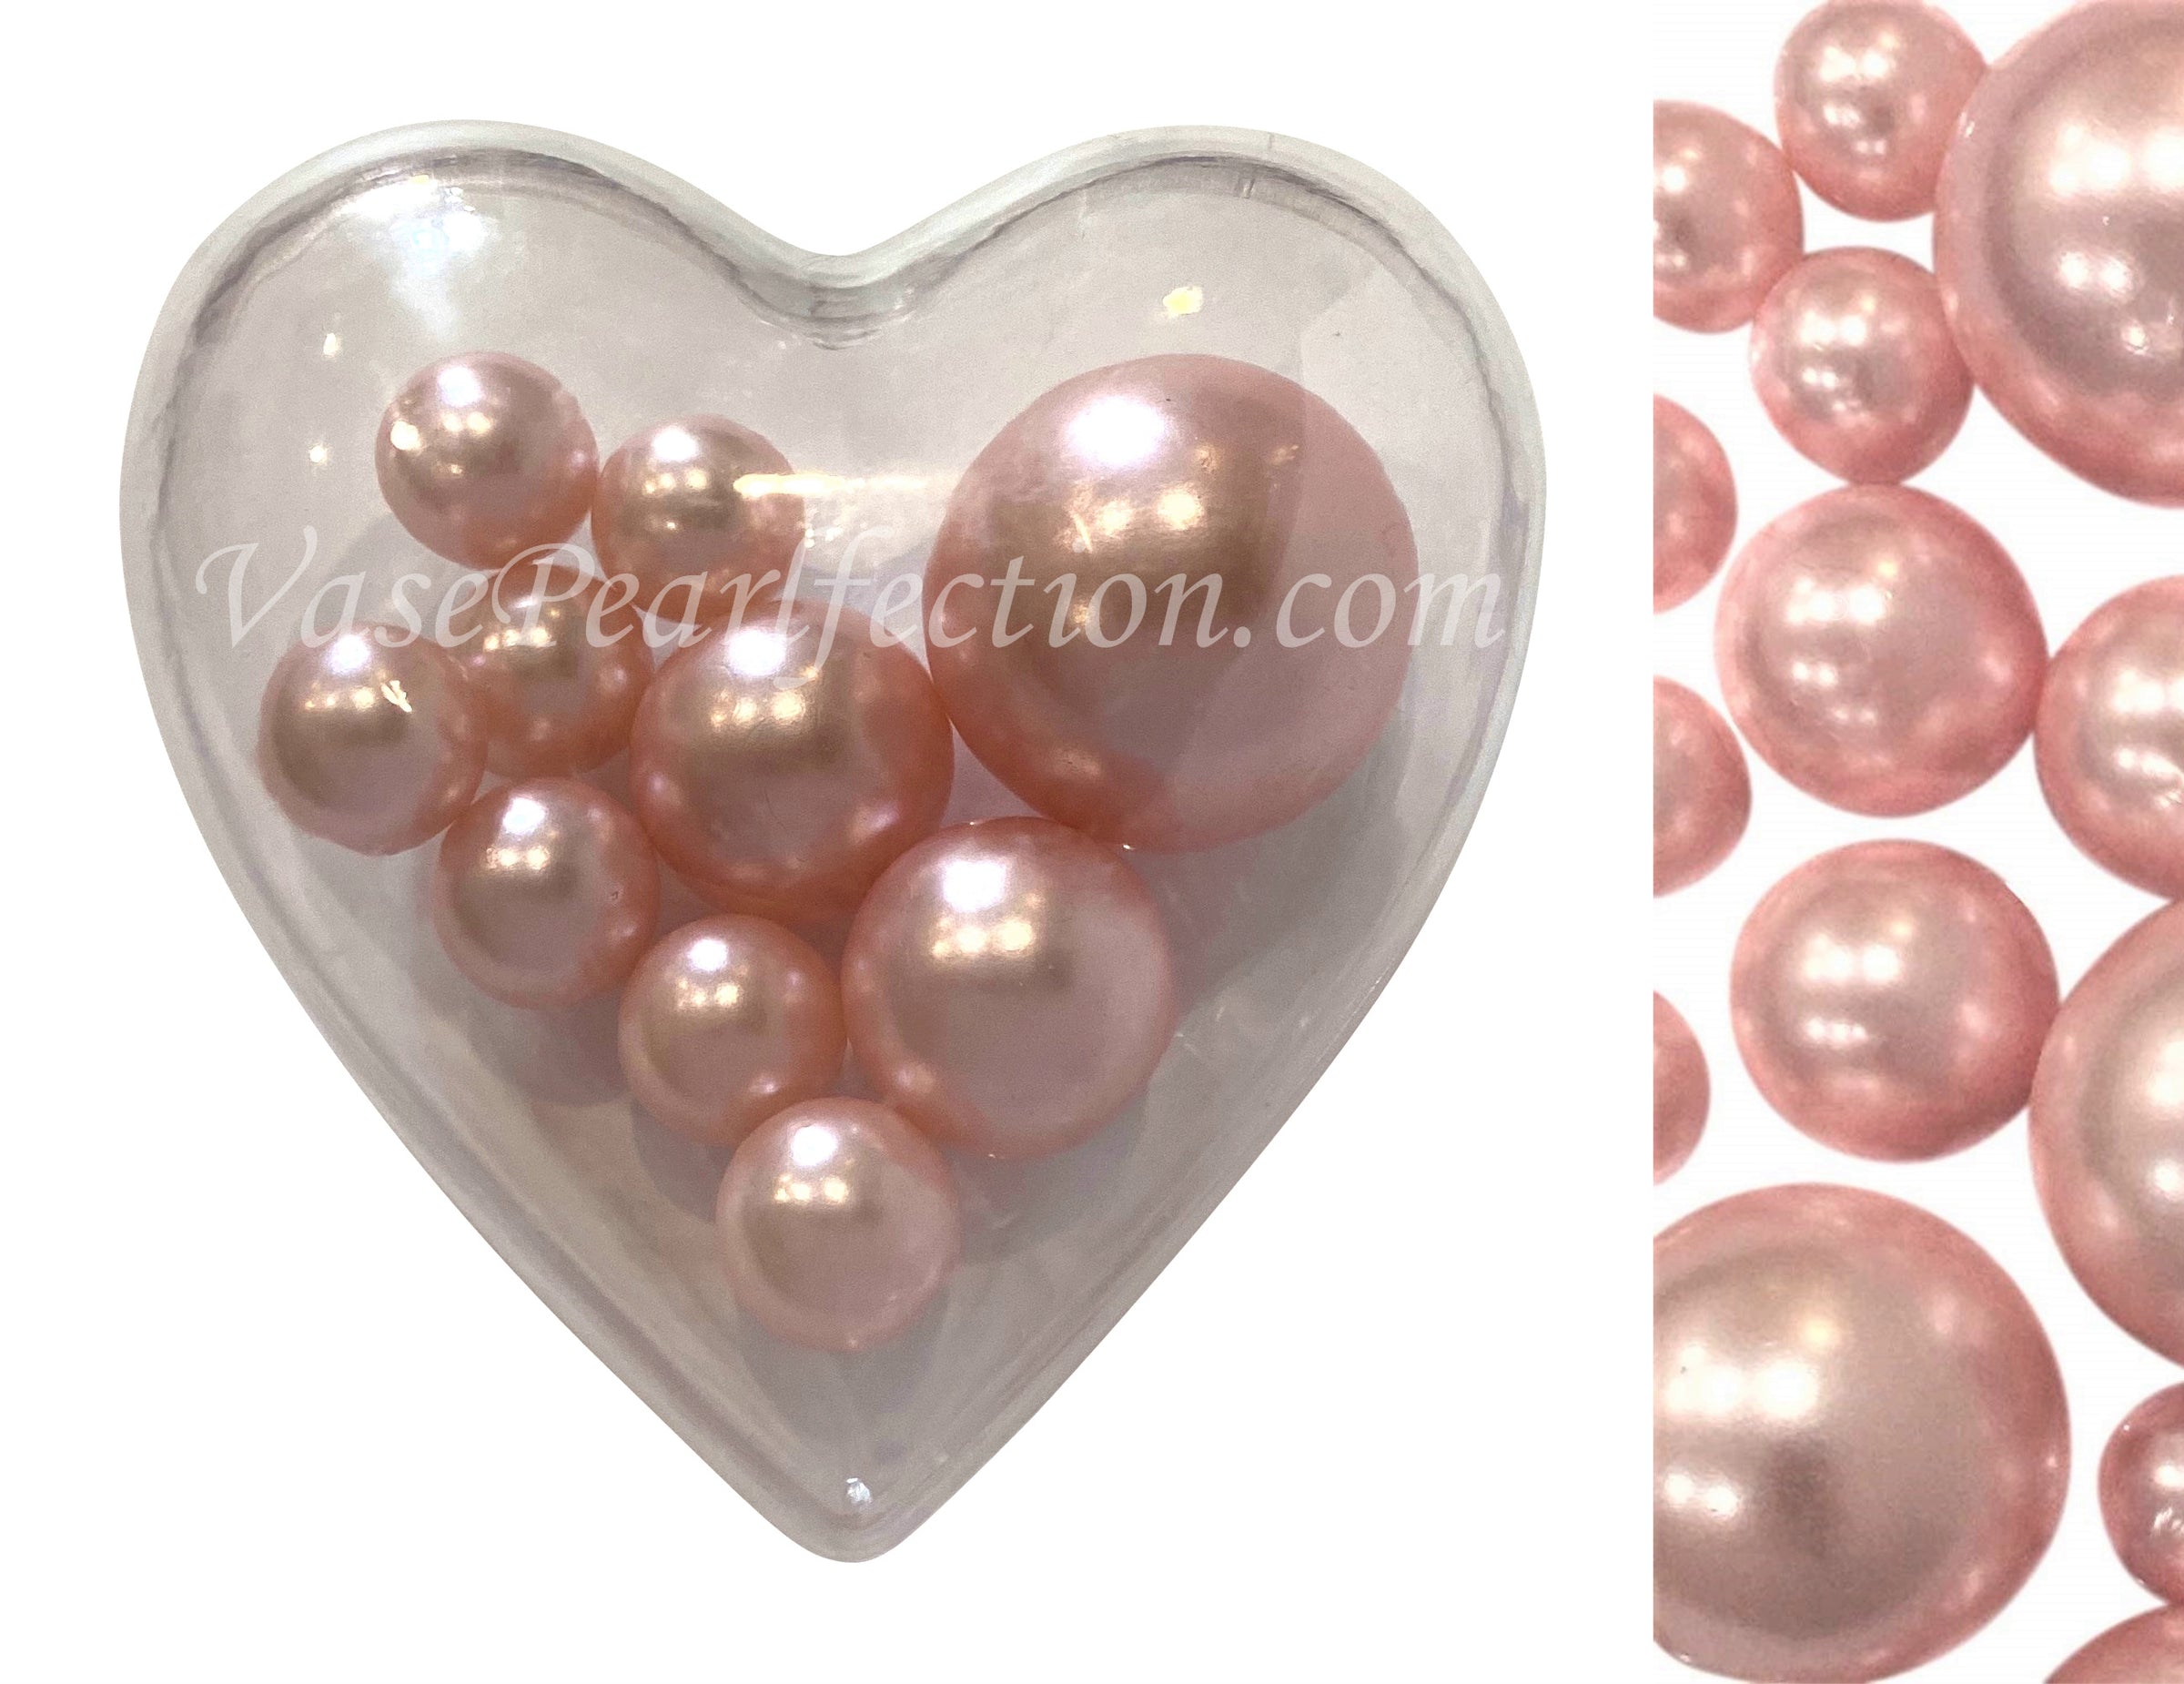 160 Floating Blush Pink & White Pearls With Matching Gems Fills 3